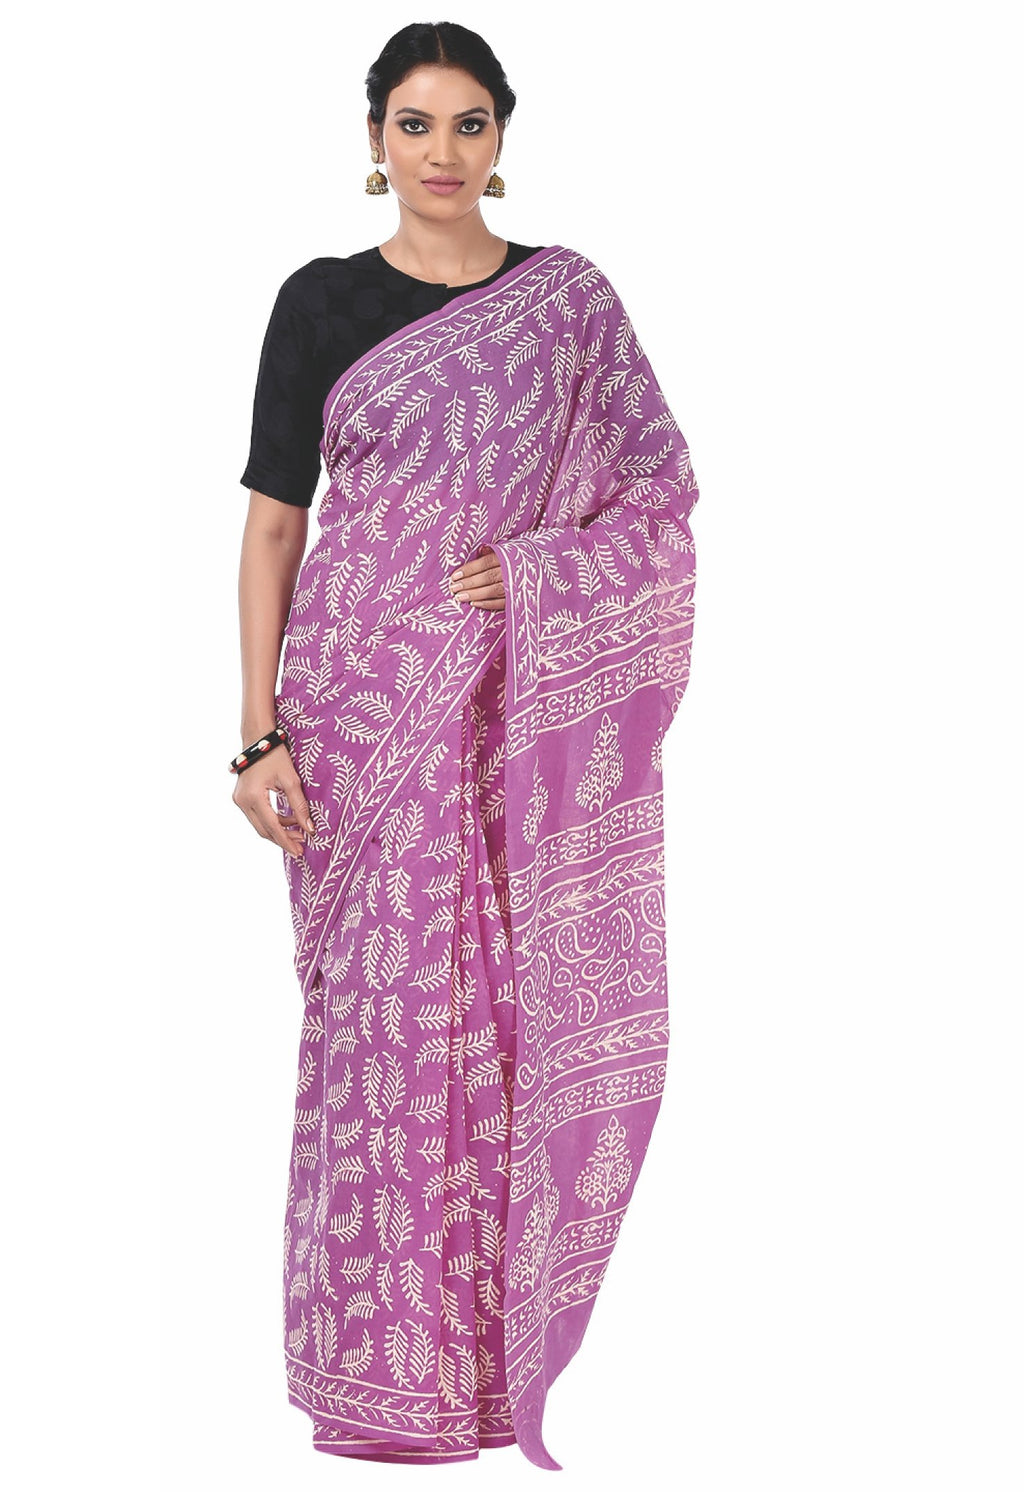 Pink Cotton Colored Dabu Hand Block Print Handcrafted Saree-Saree-Kalakari India-BAPASA0045-Cotton, Dabu, Geographical Indication, Hand Blocks, Hand Crafted, Heritage Prints, Natural Dyes, Sarees, Sustainable Fabrics-[Linen,Ethnic,wear,Fashionista,Handloom,Handicraft,Indigo,blockprint,block,print,Cotton,Chanderi,Blue, latest,classy,party,bollywood,trendy,summer,style,traditional,formal,elegant,unique,style,hand,block,print, dabu,booti,gift,present,glamorous,affordable,collectible,Sari,Saree,prin